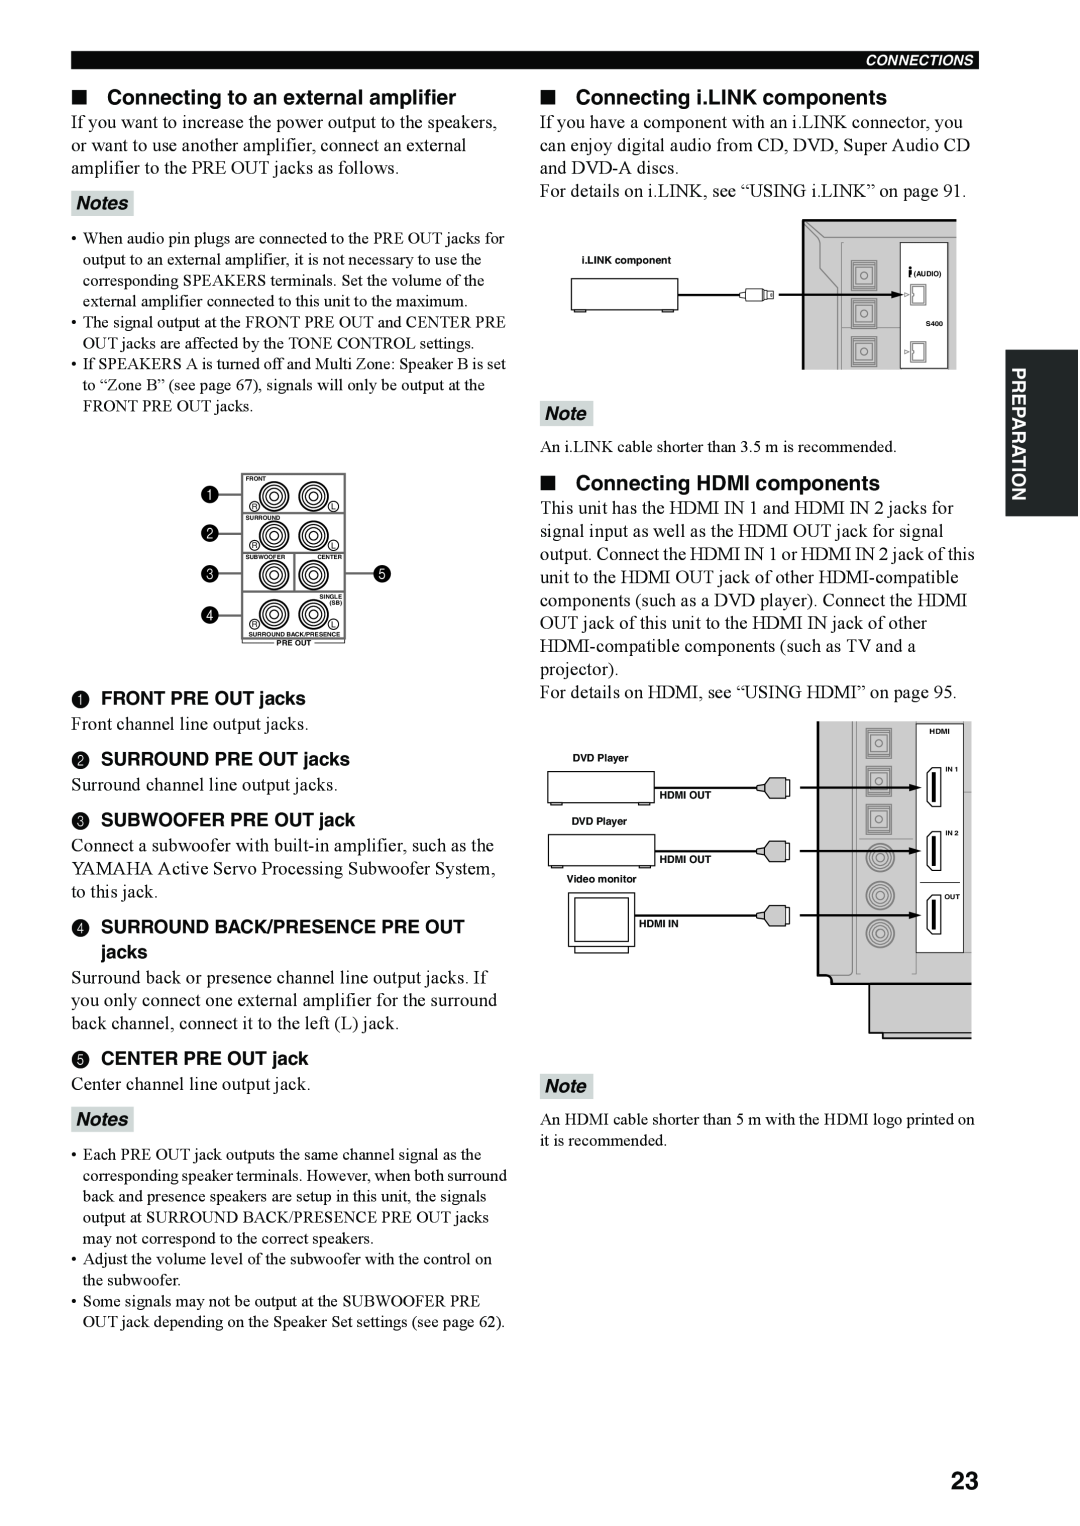 Yamaha RX-V4600 owner manual Connecting to an external amplifier, Connecting i.LINK components, Connecting HDMI components 